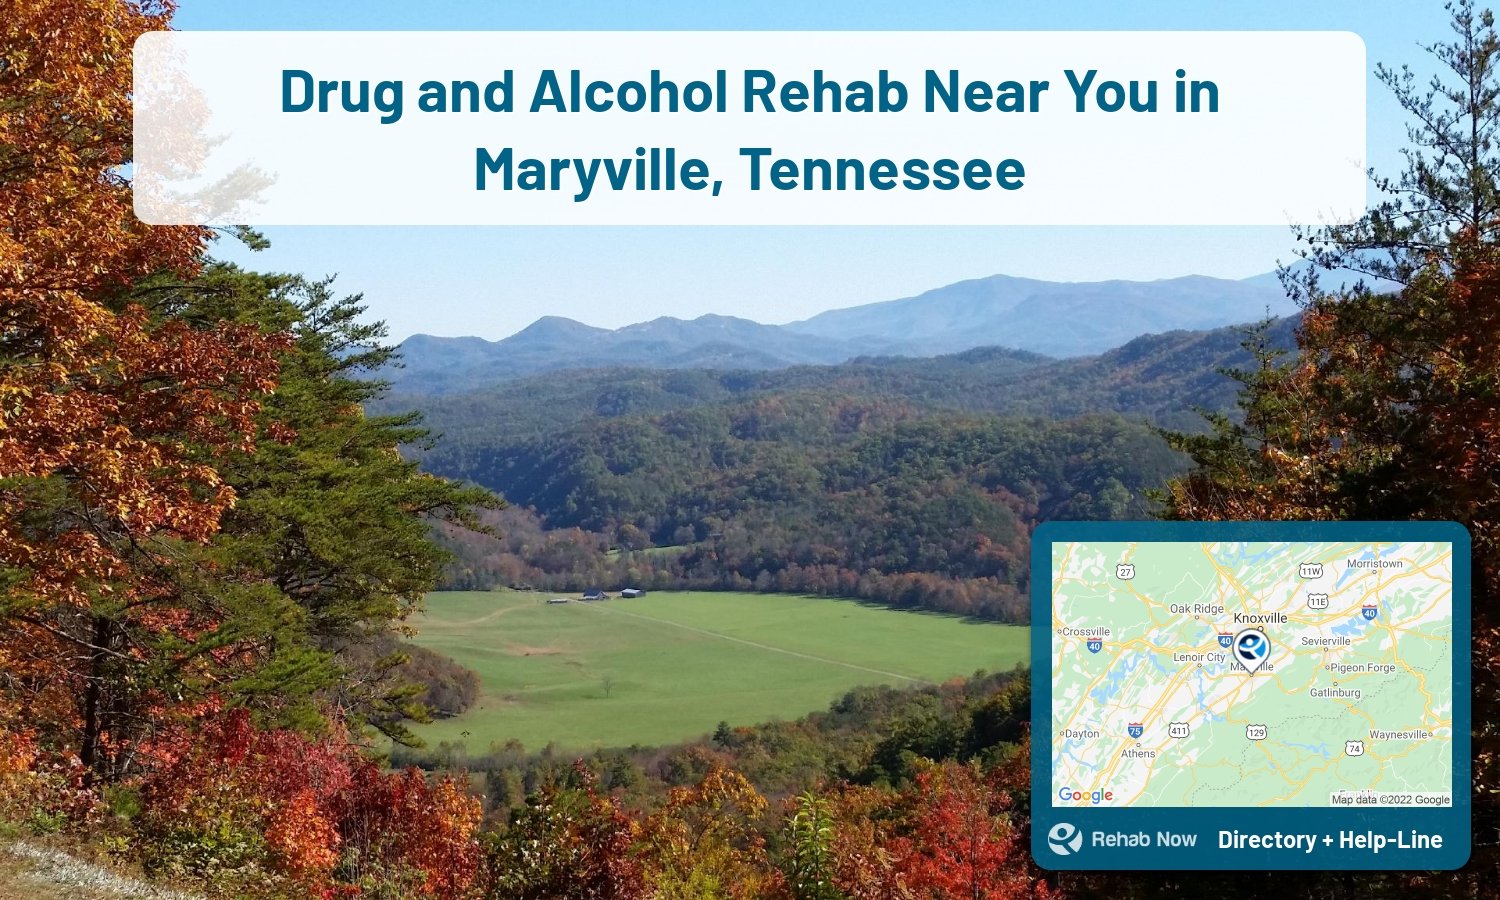 List of alcohol and drug treatment centers near you in Maryville, Tennessee. Research certifications, programs, methods, pricing, and more.